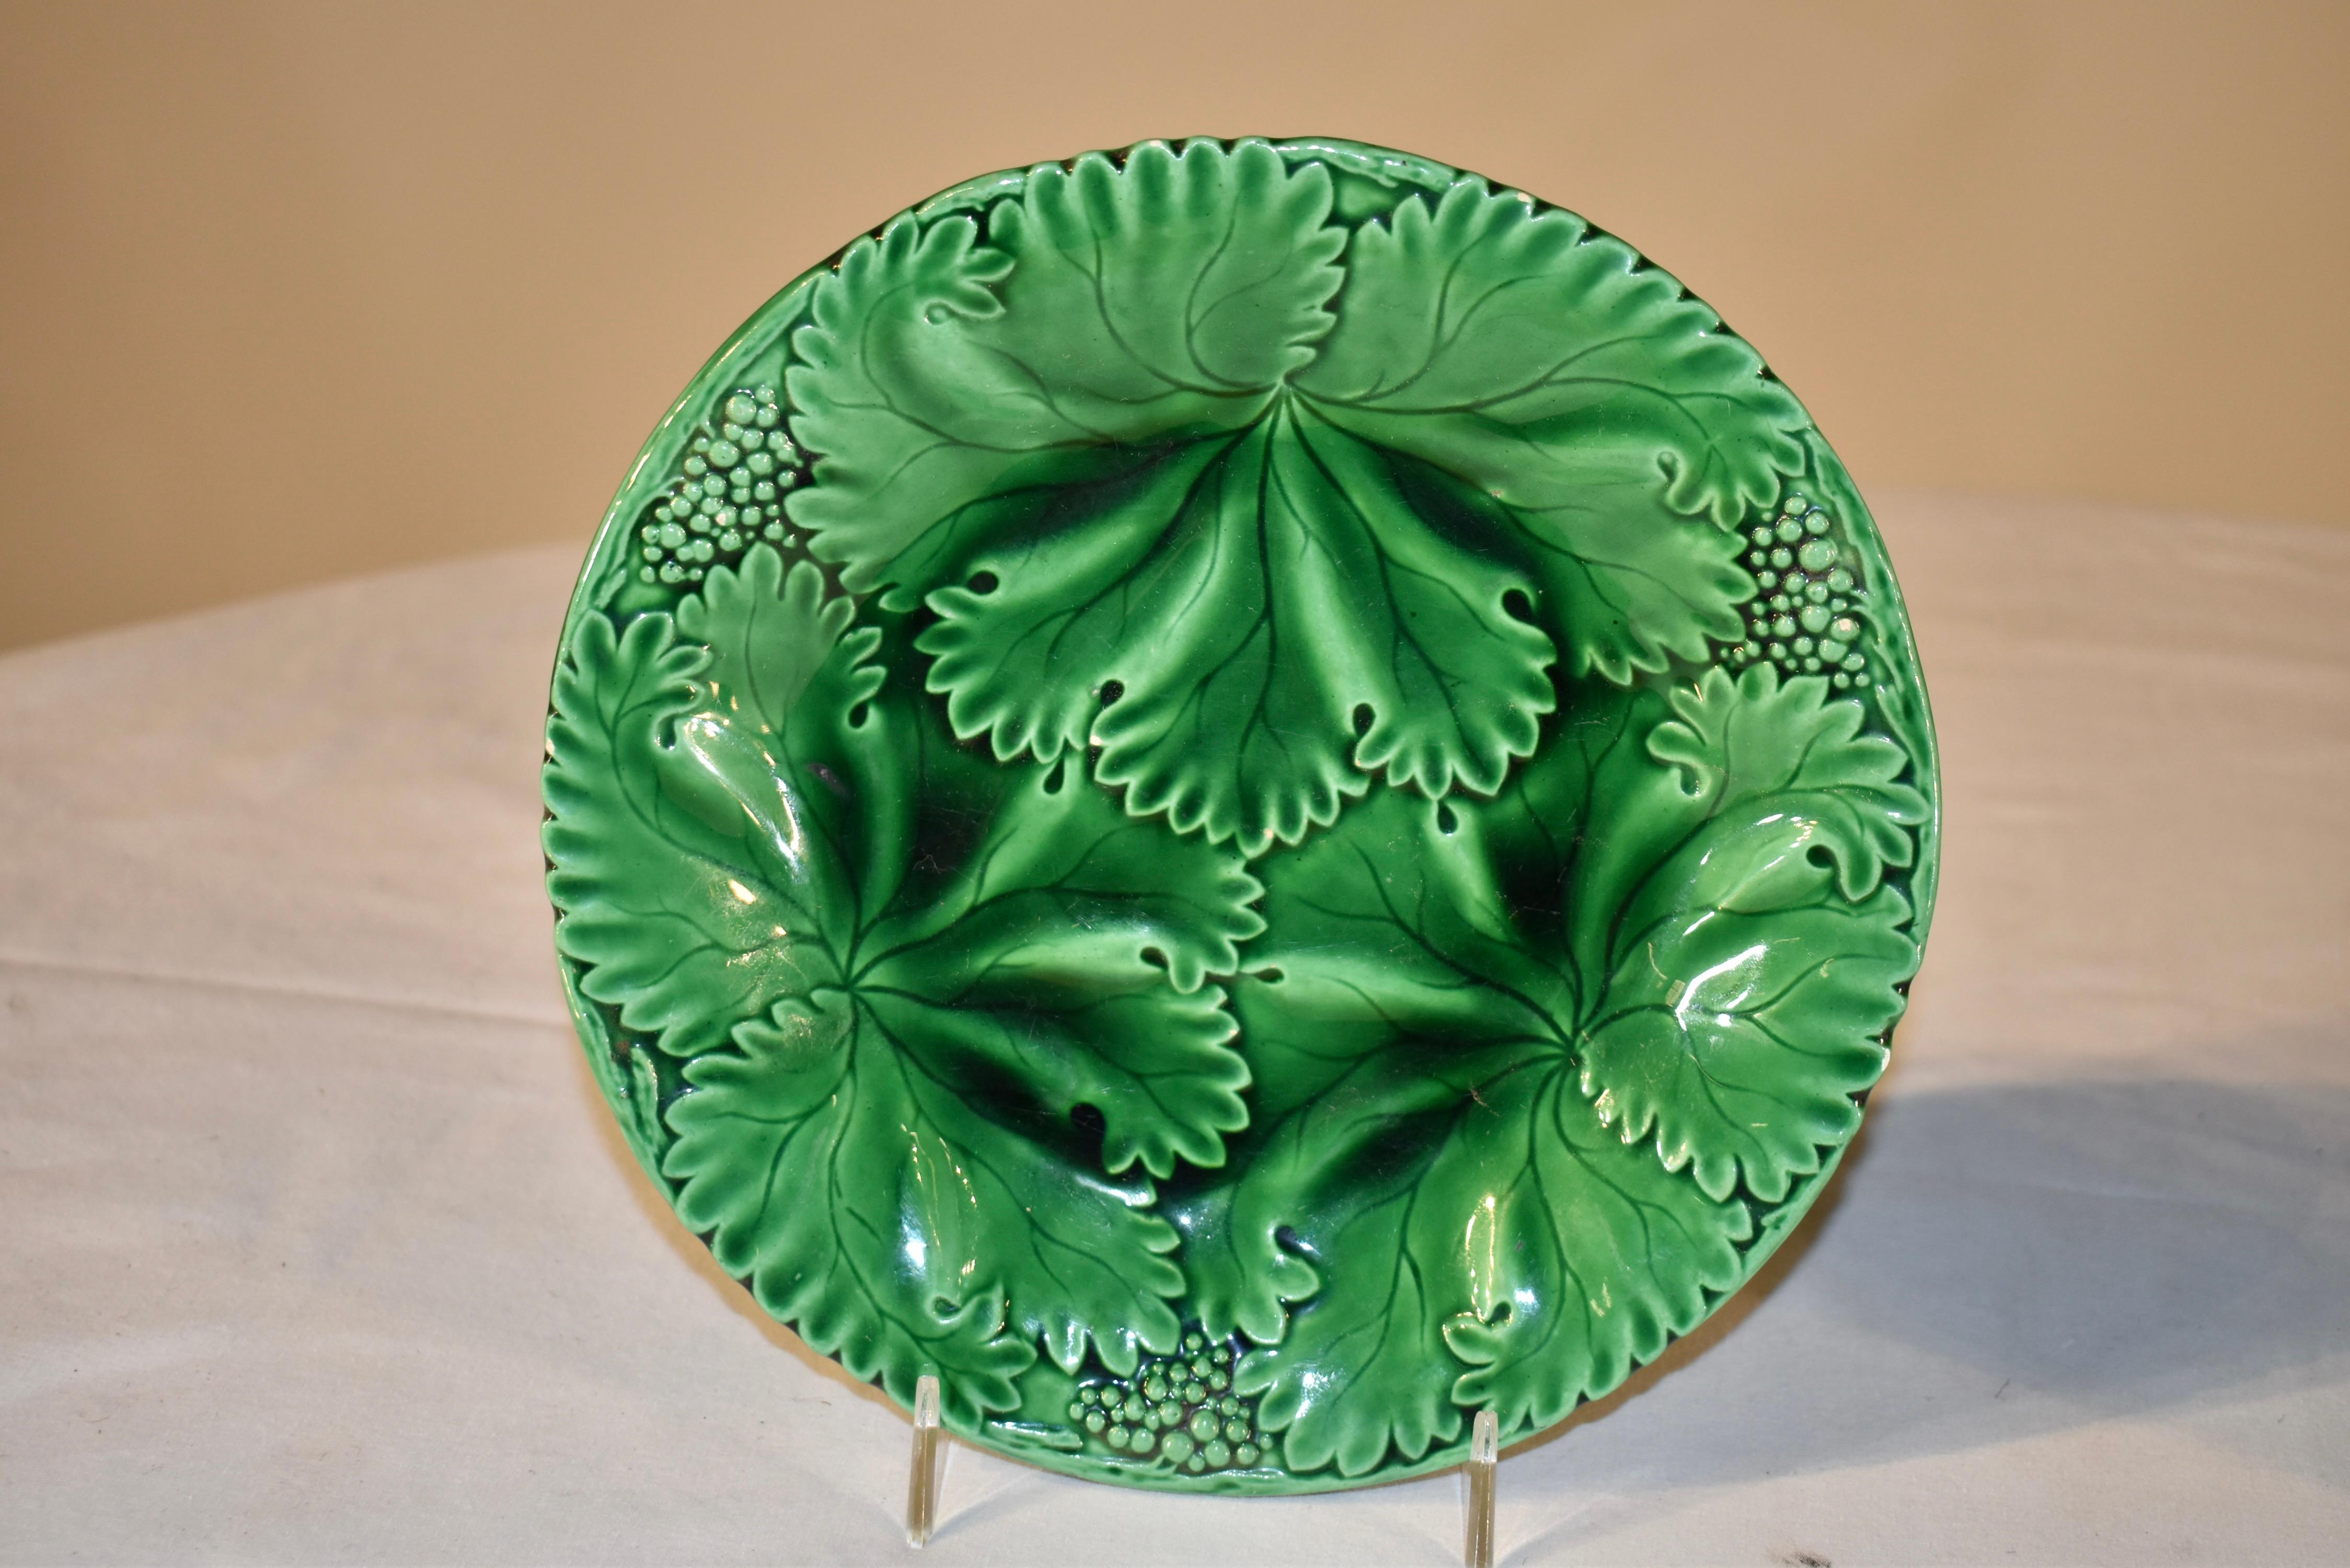 Glazed Pair of 19th Century Majolica Plates For Sale